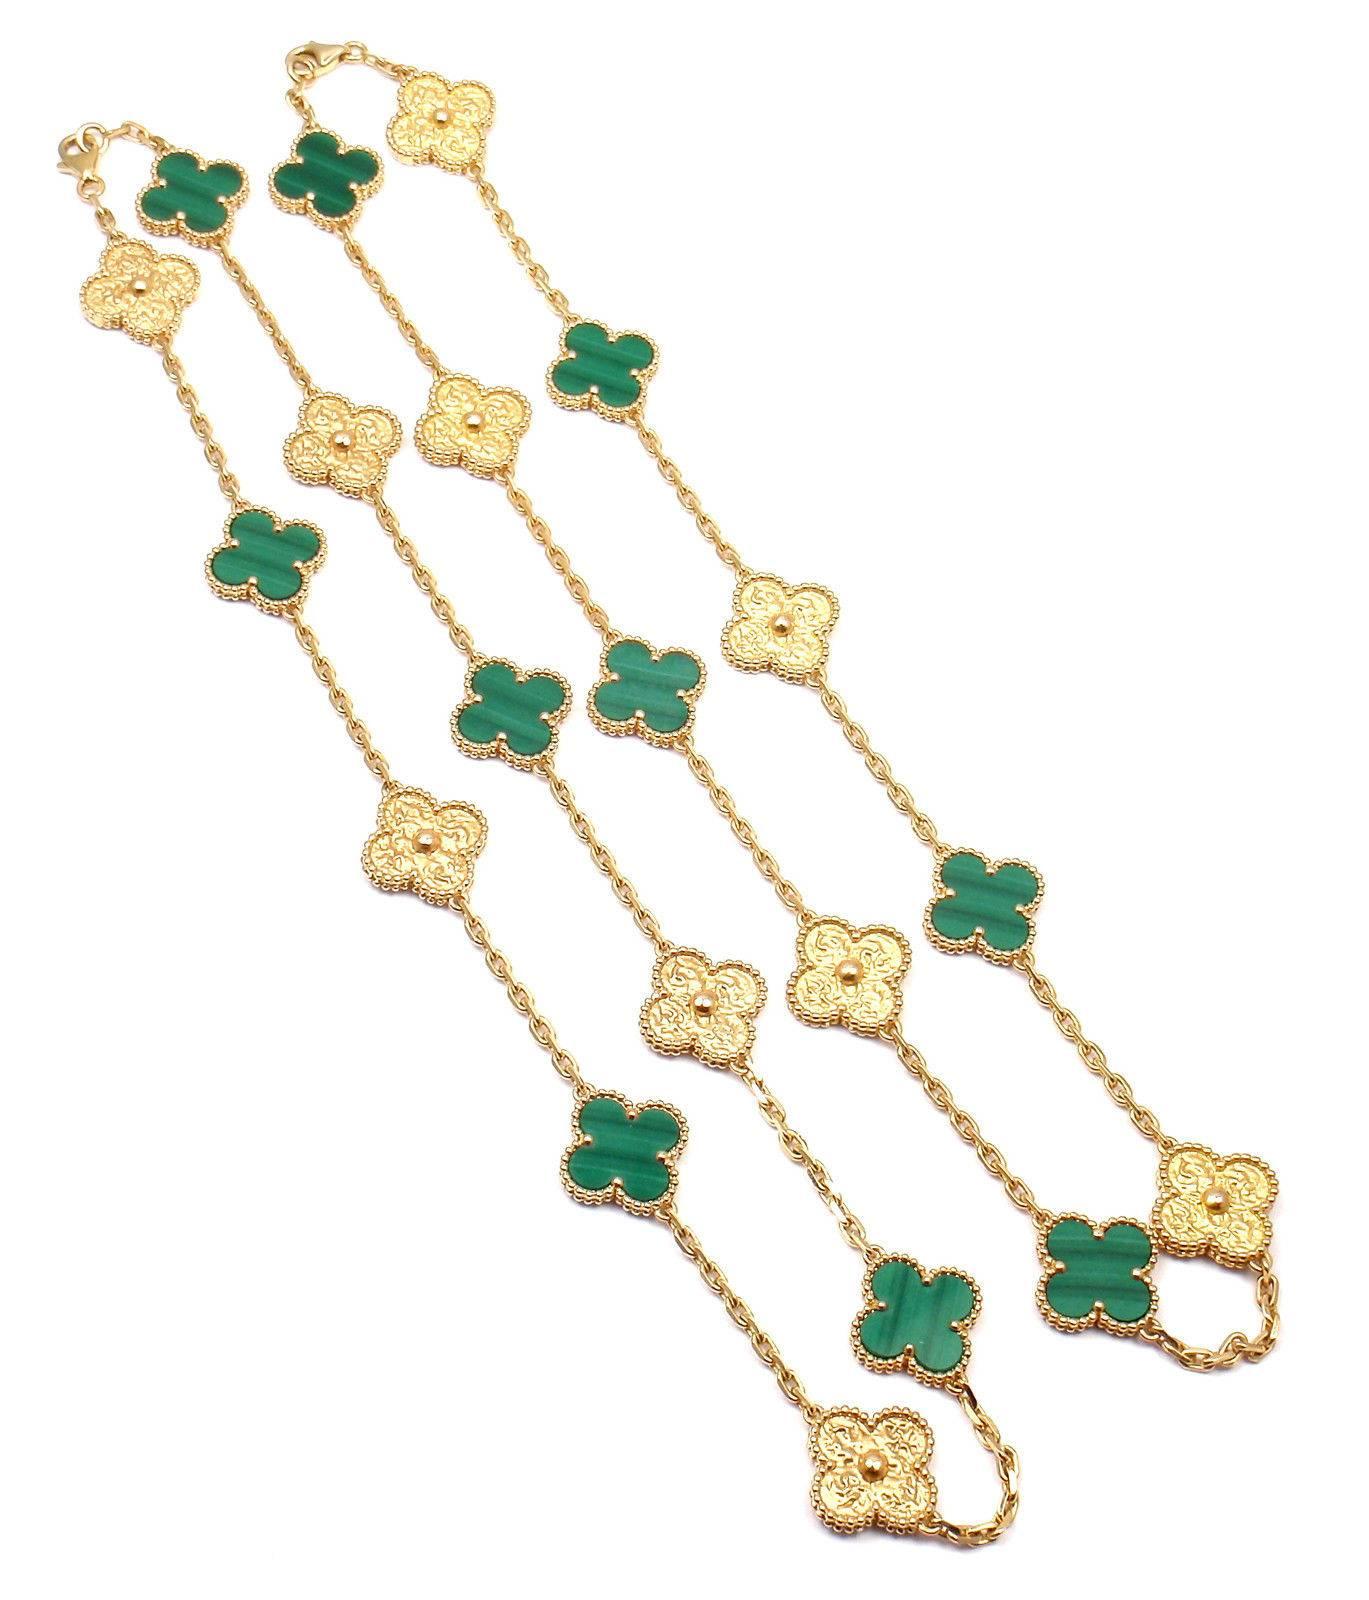 18k Yellow Gold Set Of 2 Vintage Alhambra Ten-Motif Each Malachite Special Necklaces by Van Cleef & Arpels. 
With 5 motifs of Malachite Stone And 5 Motifs of Yellow Gold Alhambras, 15mm each, 2 necklaces x 10 motifs each.
These two necklaces come